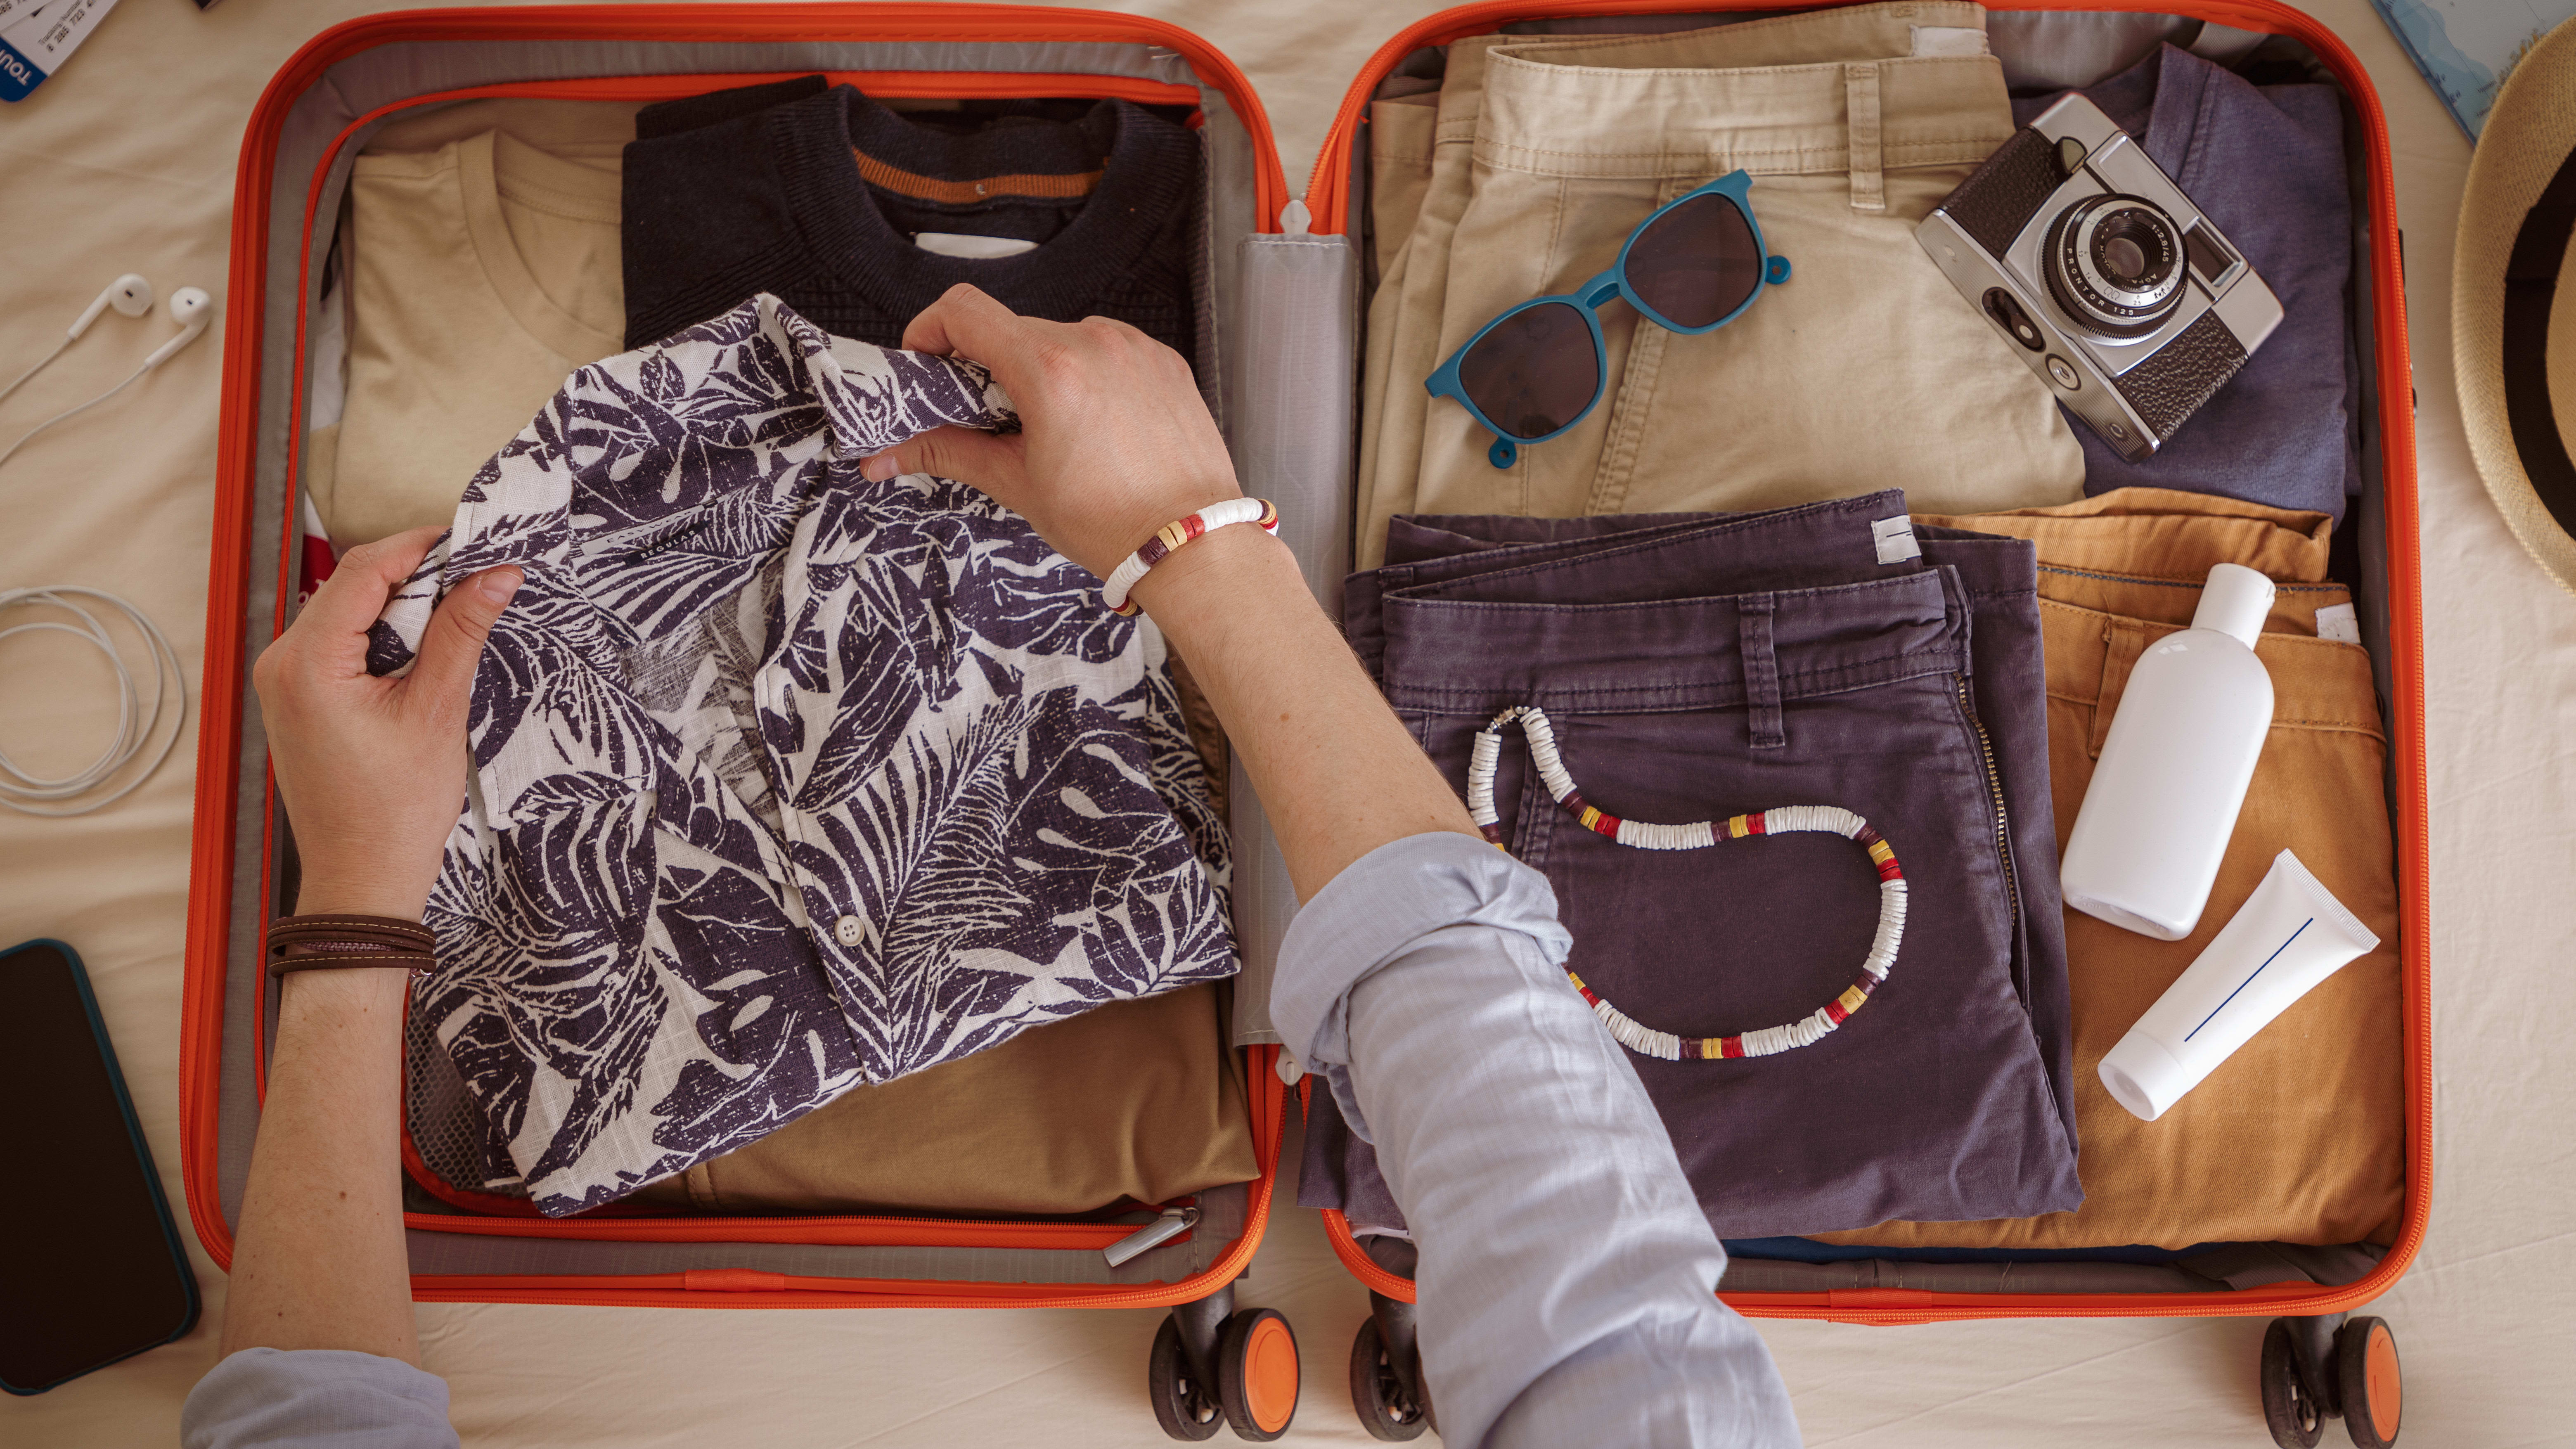 Packing Lessons We’ve Learned After 8.5 Years of Full-Time Travel